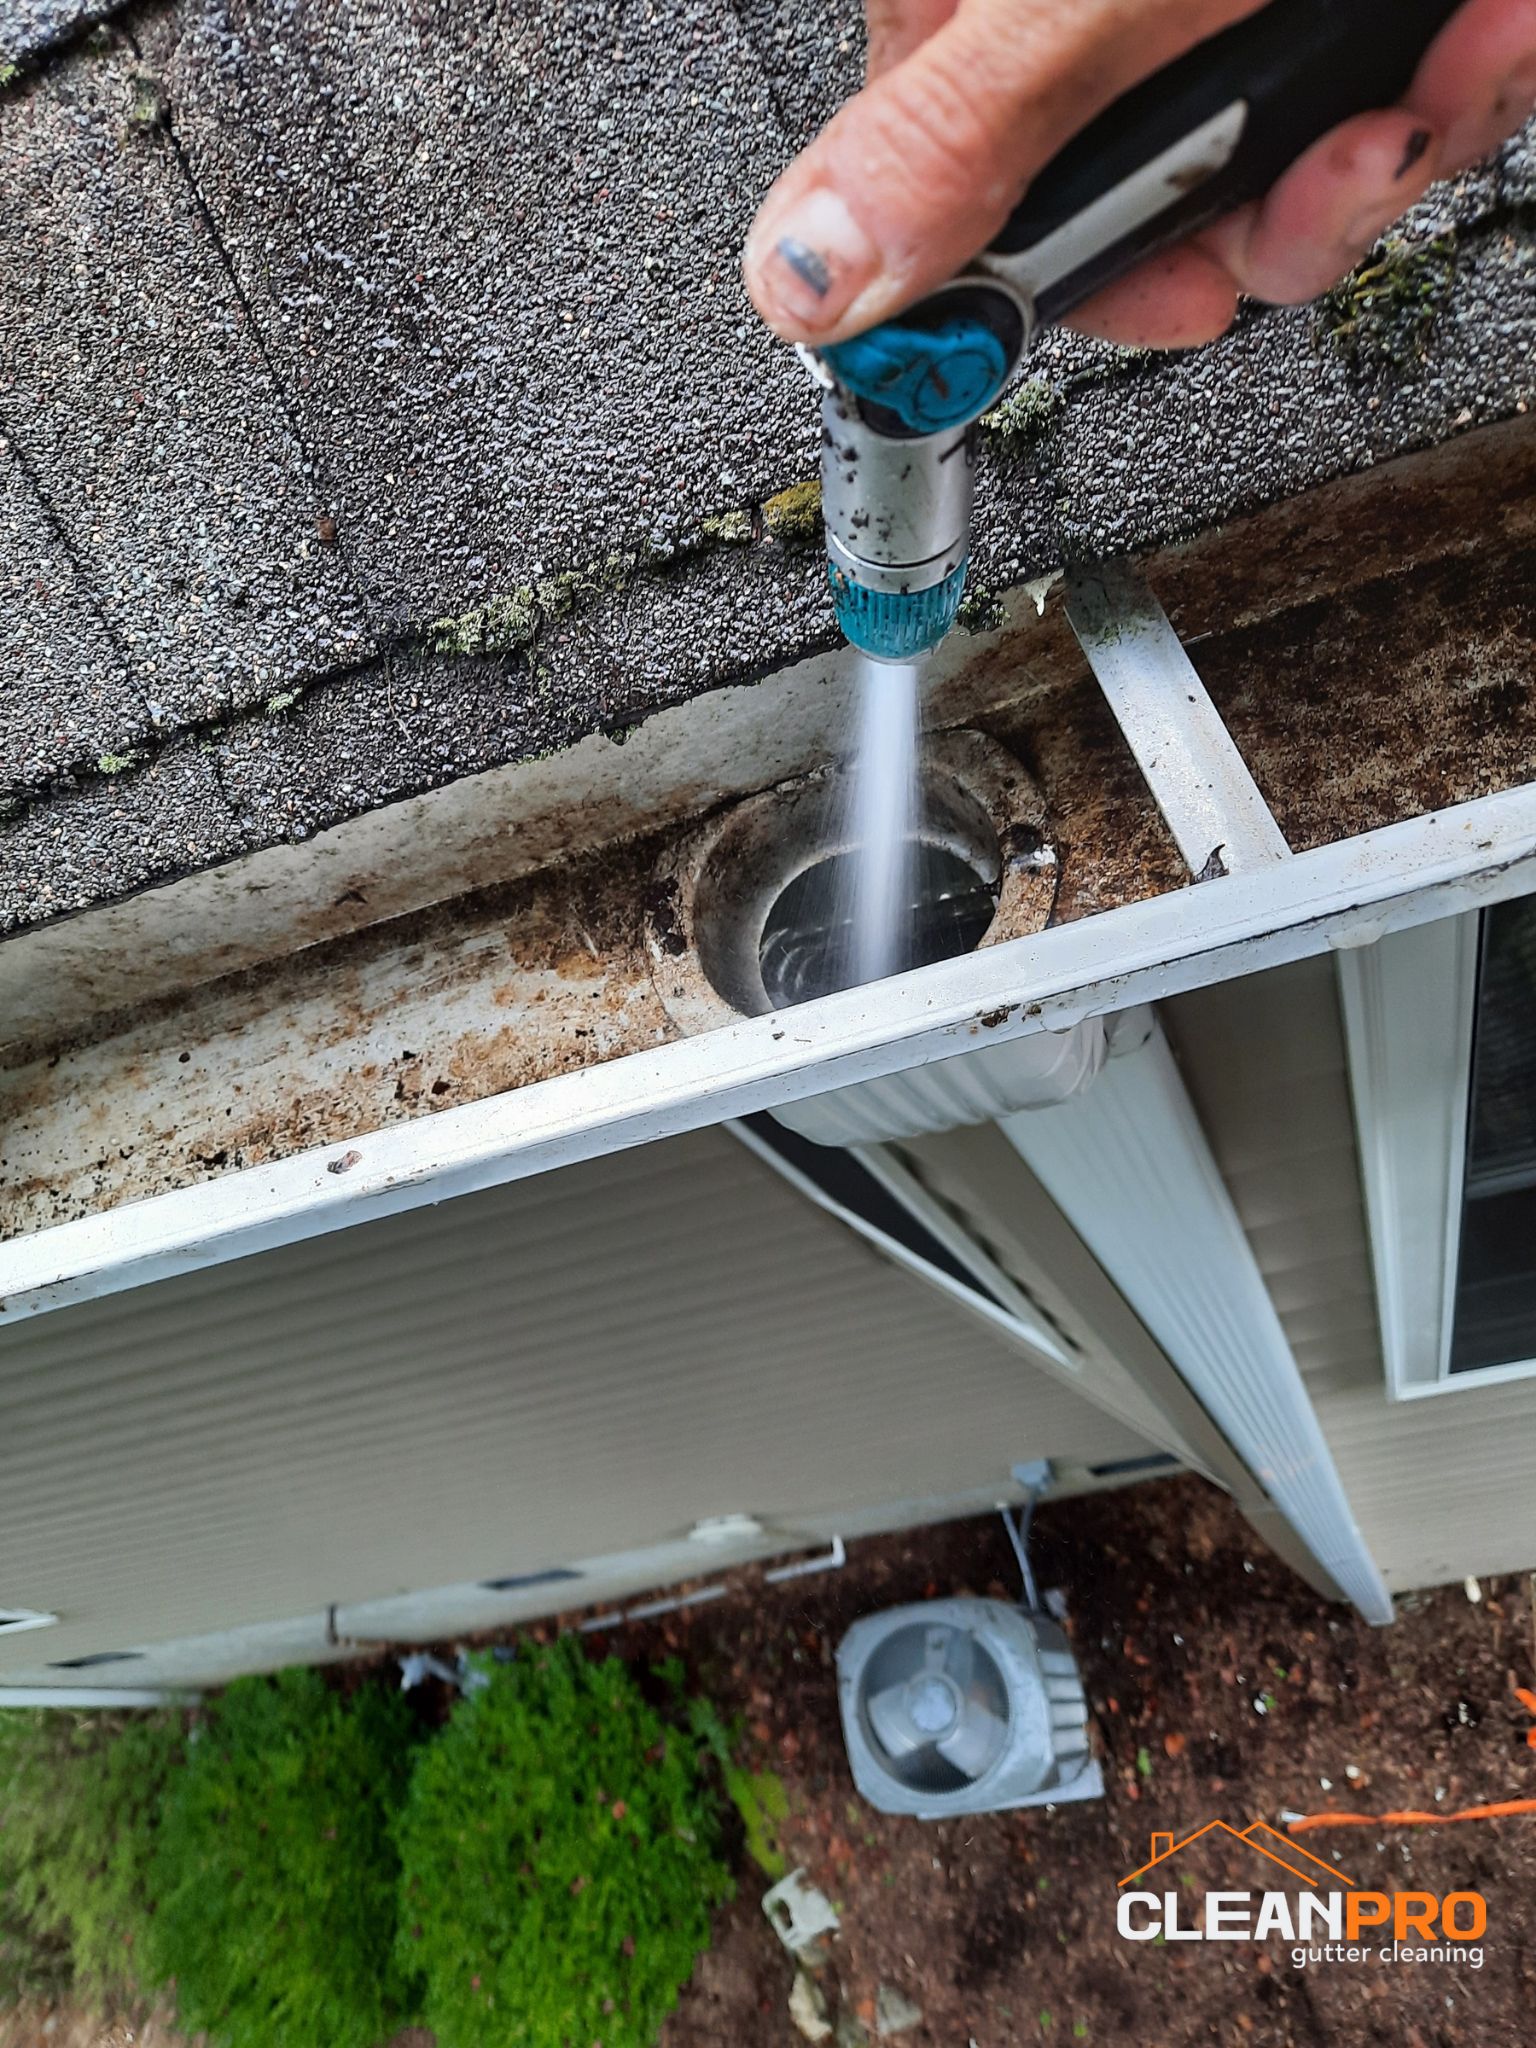 Professional Greenville Gutter Cleaners